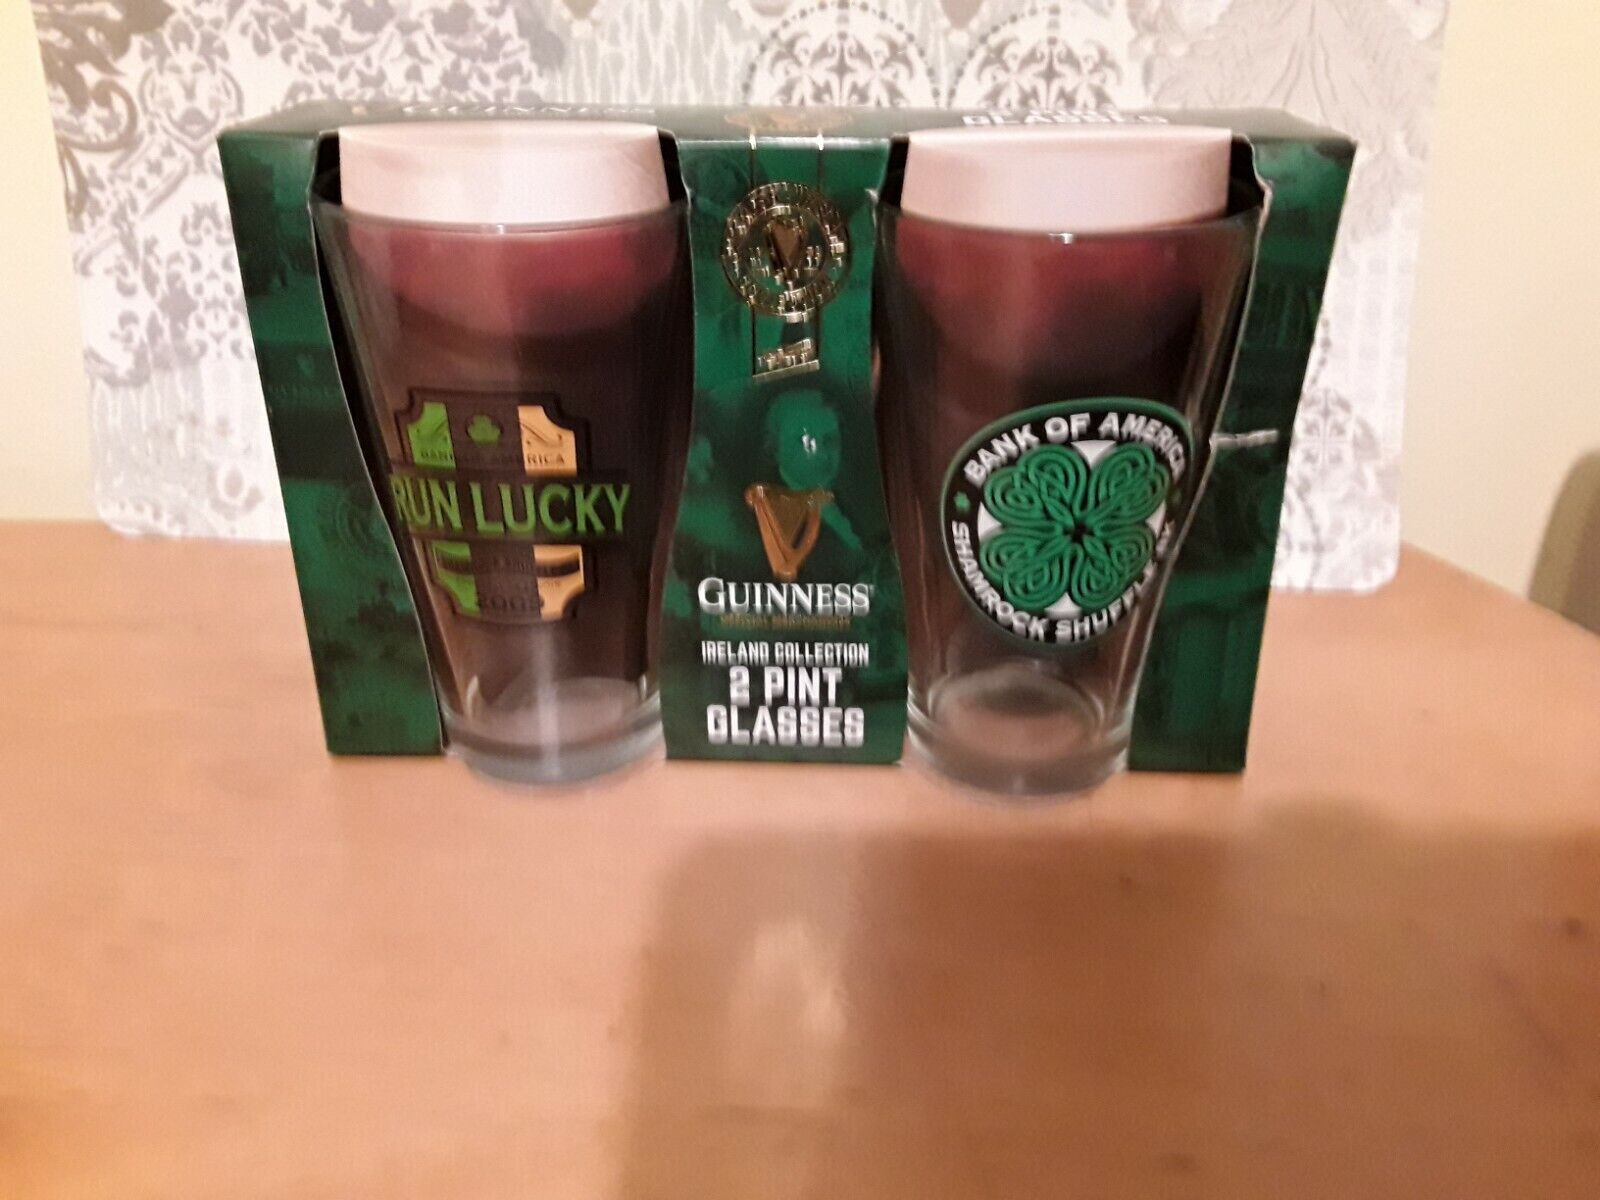 2 Guinness Bank Of America Glasses Ireland Collection